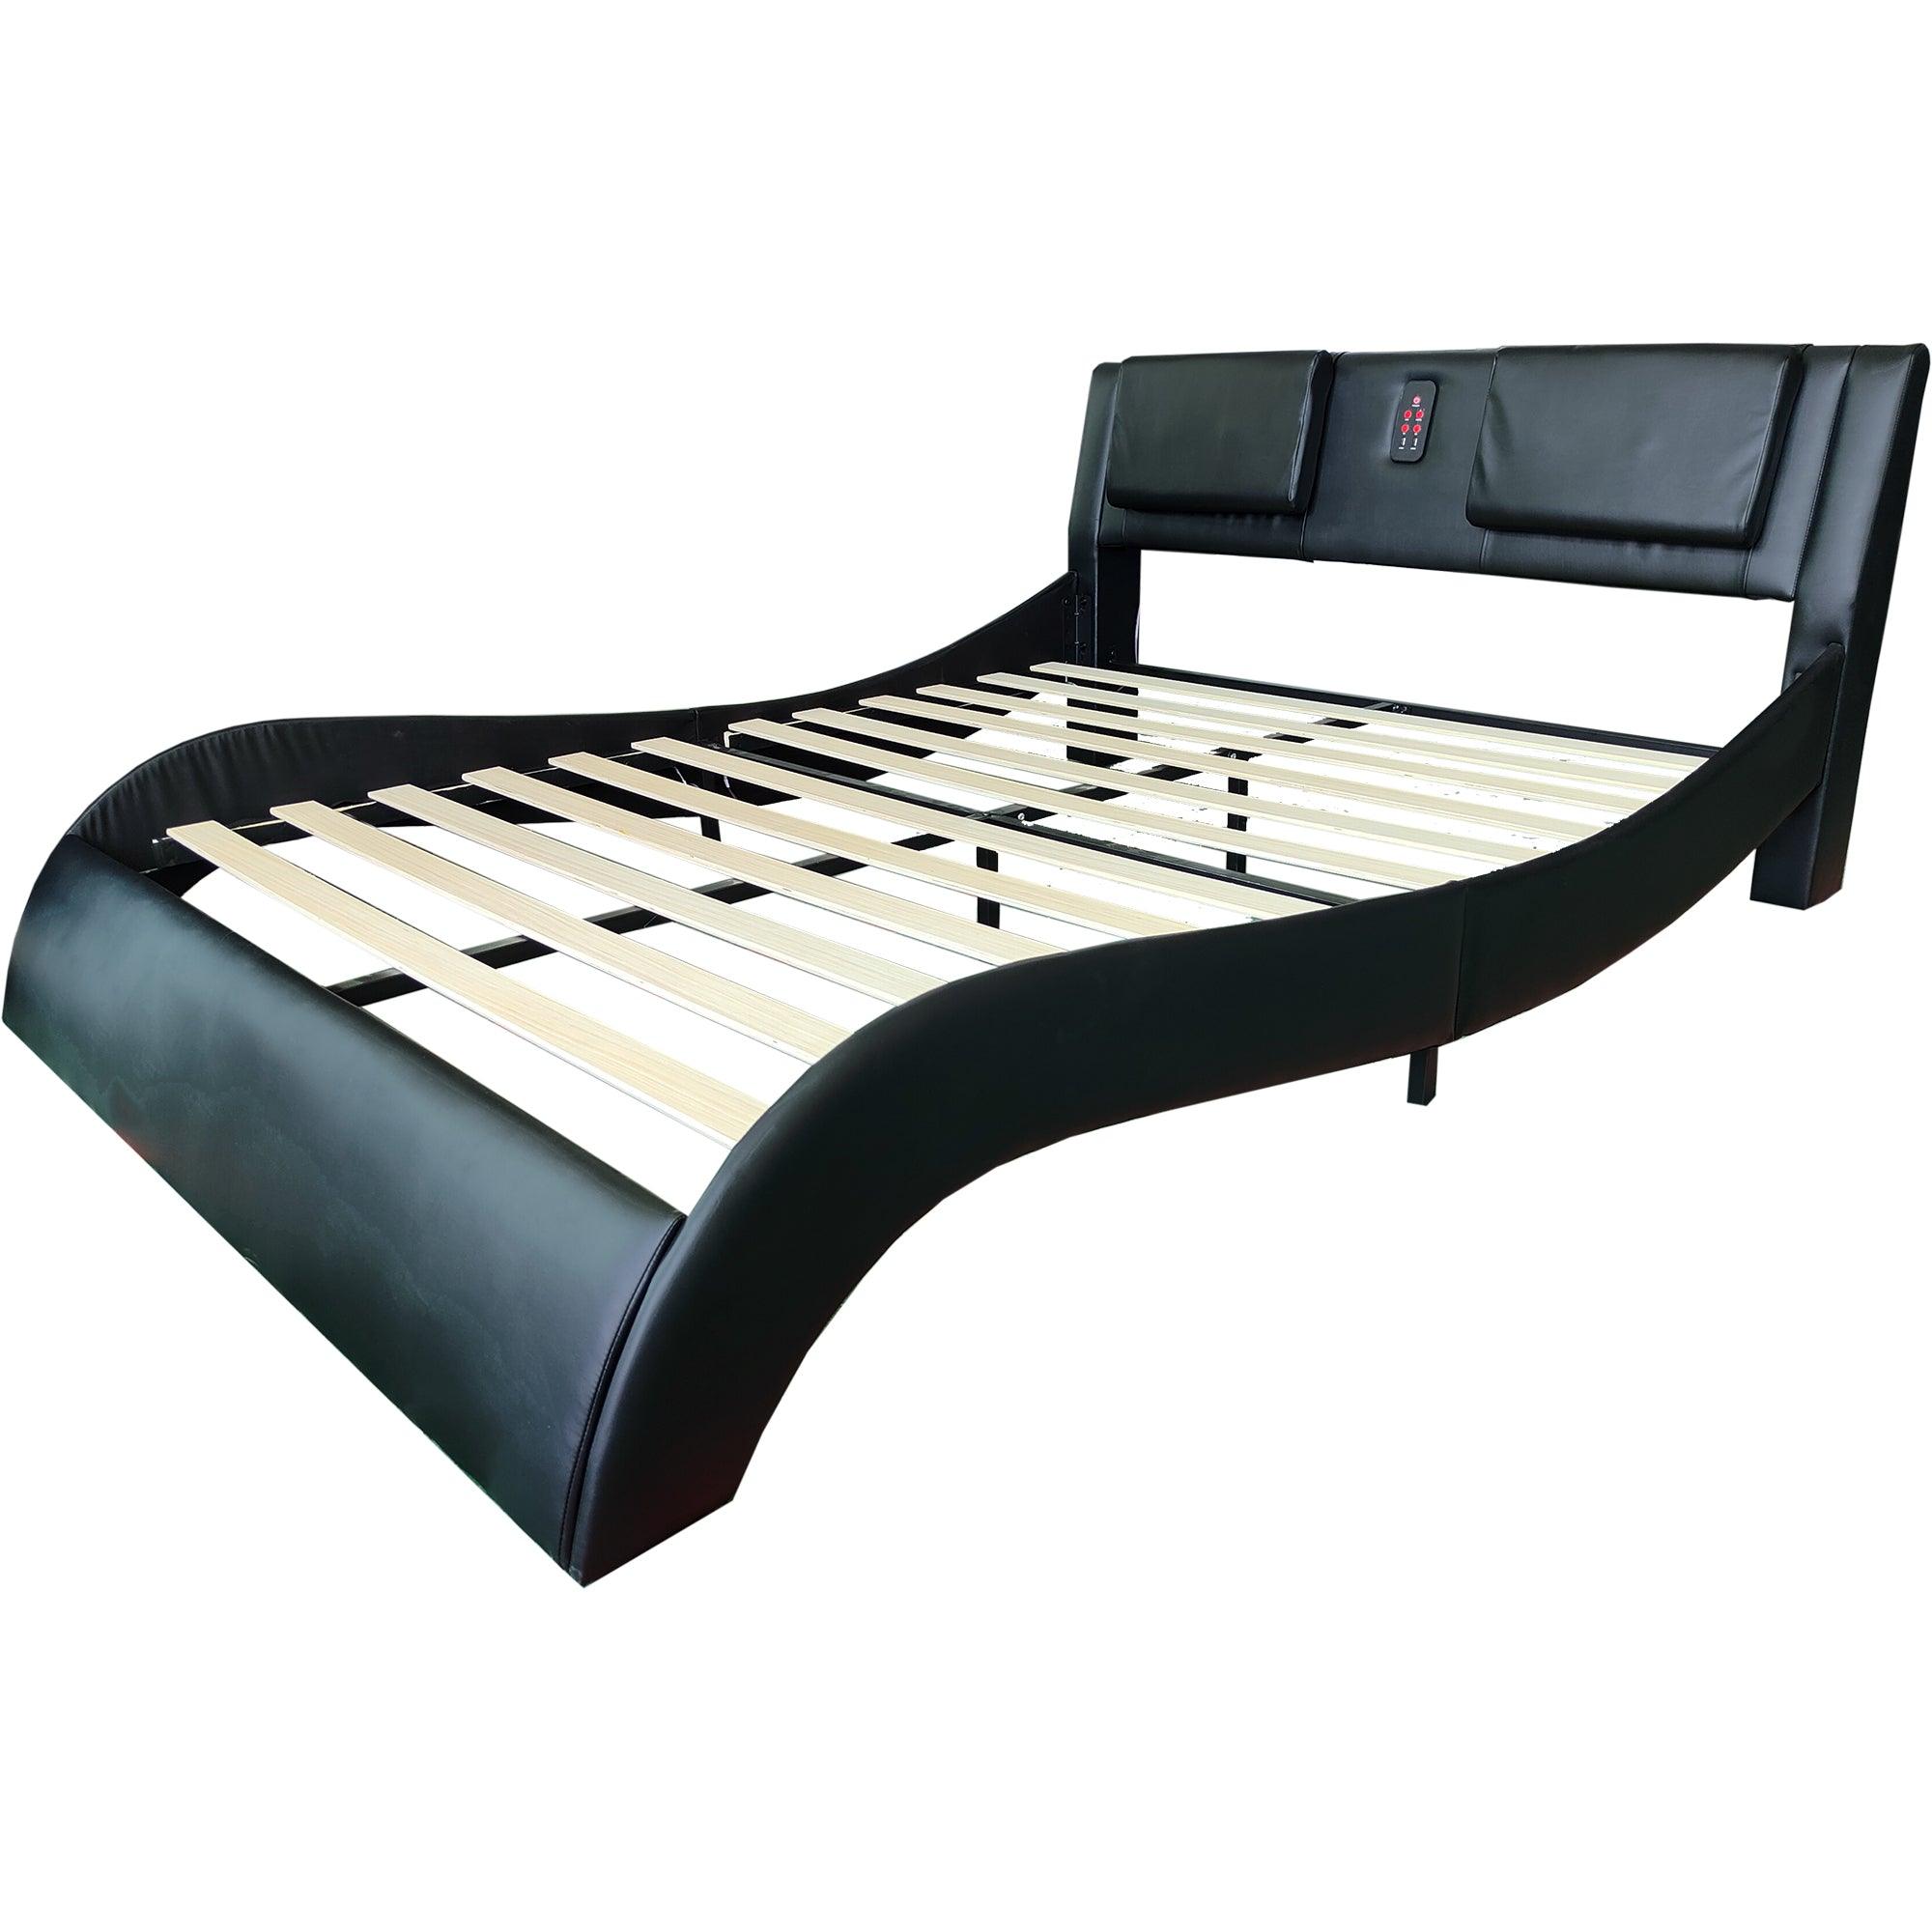 Faux Leather Upholstered Platform Bed Frame With Led Lighting, Bluetooth Connection To Play Music Control, Backrest Vibration Massage, Curve Design, Wood Slat Support, One-Carton Package, Queen